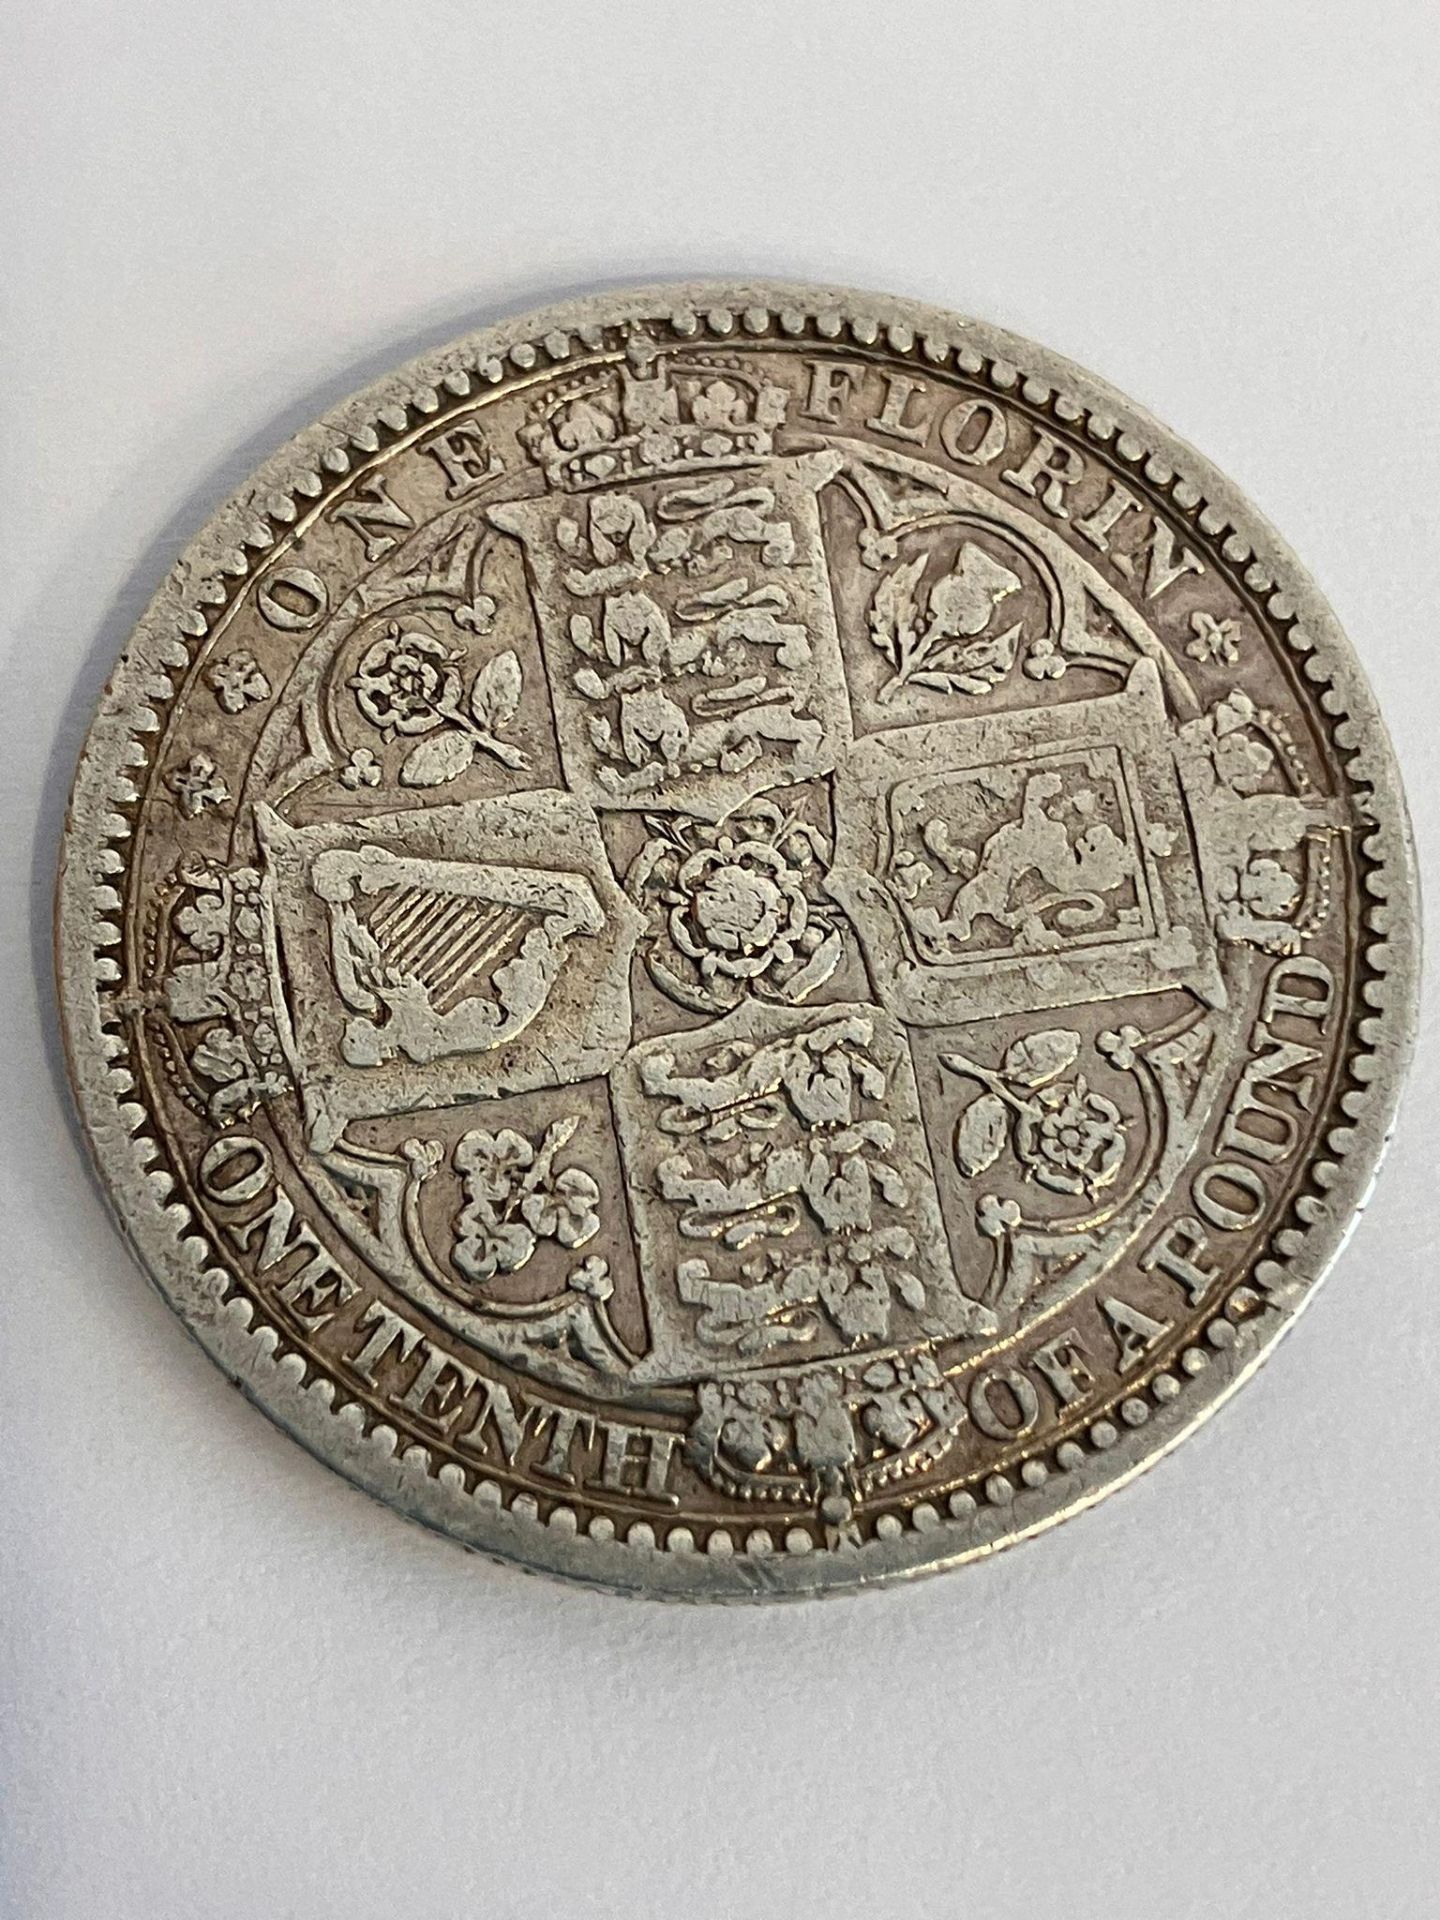 1849 SILVER GOTHIC FLORIN in very/extra fine condition. This is the coin that omitted the